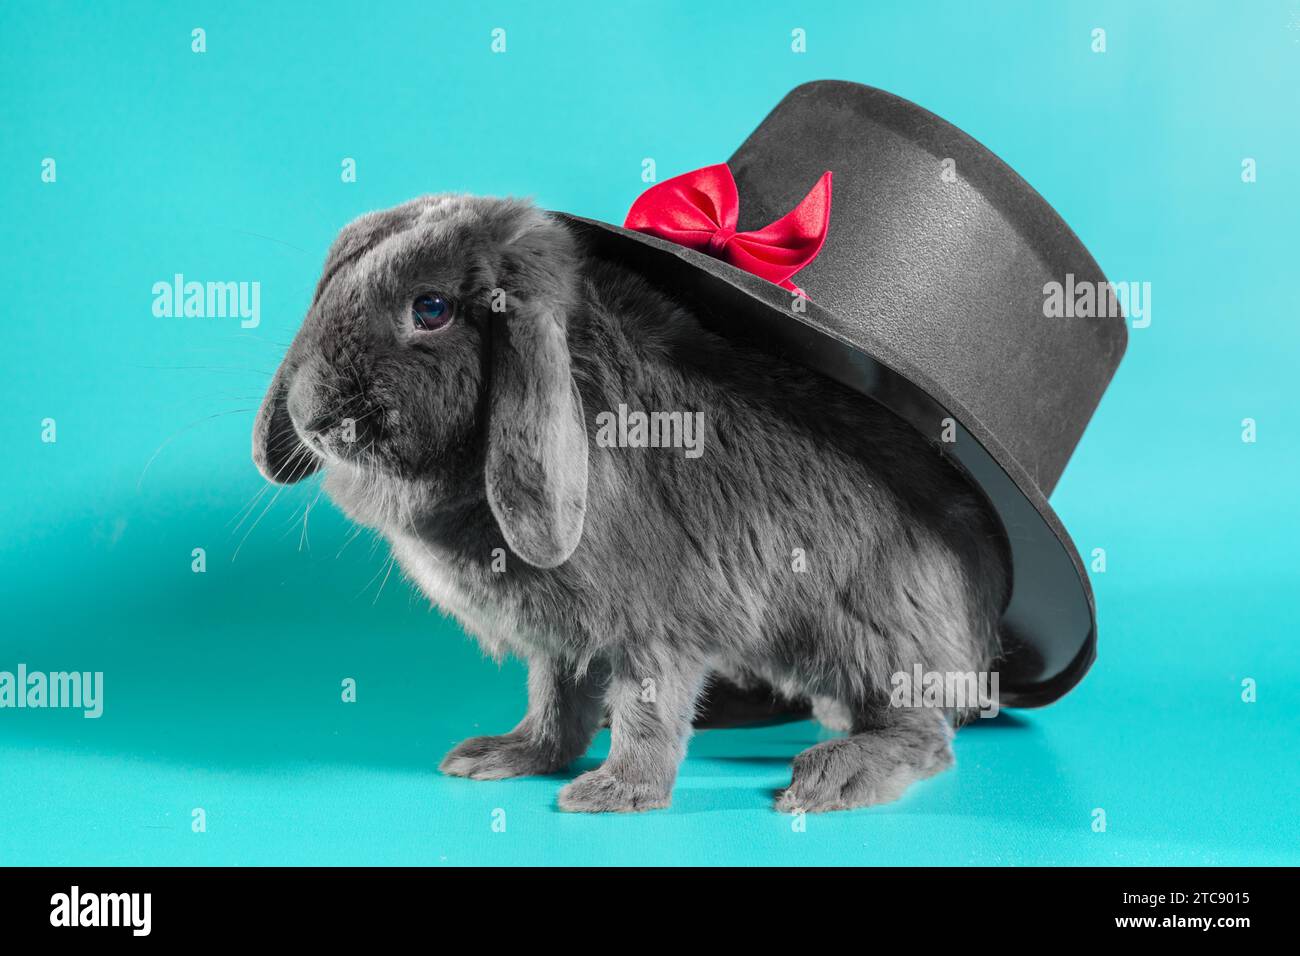 Gray lop-eared dwarf rabbit next to a black cylinder hat on a turquoise background Stock Photo